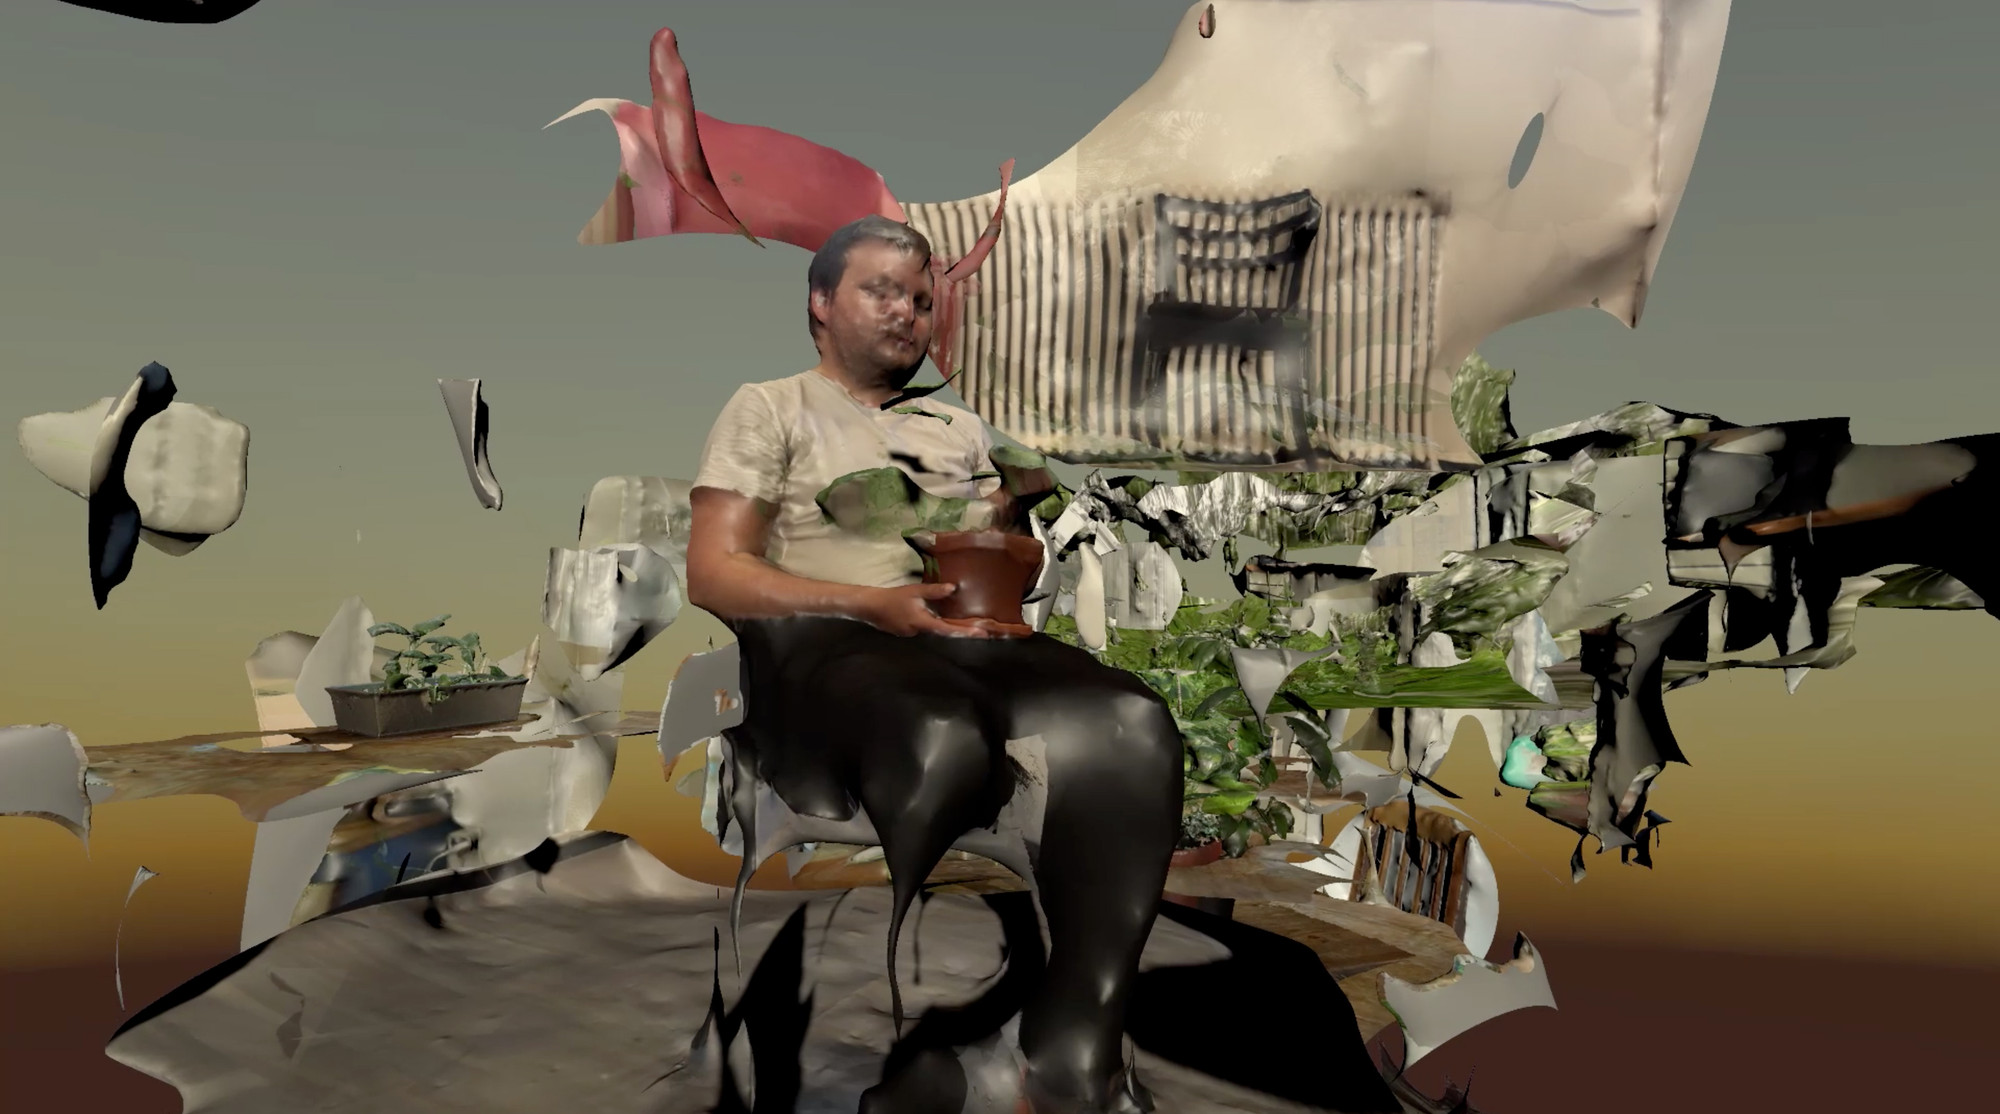 To See Without Man. Animation by Viktor Pedersen, in collaboration with artist Ingrid K. Bjørnaali.
